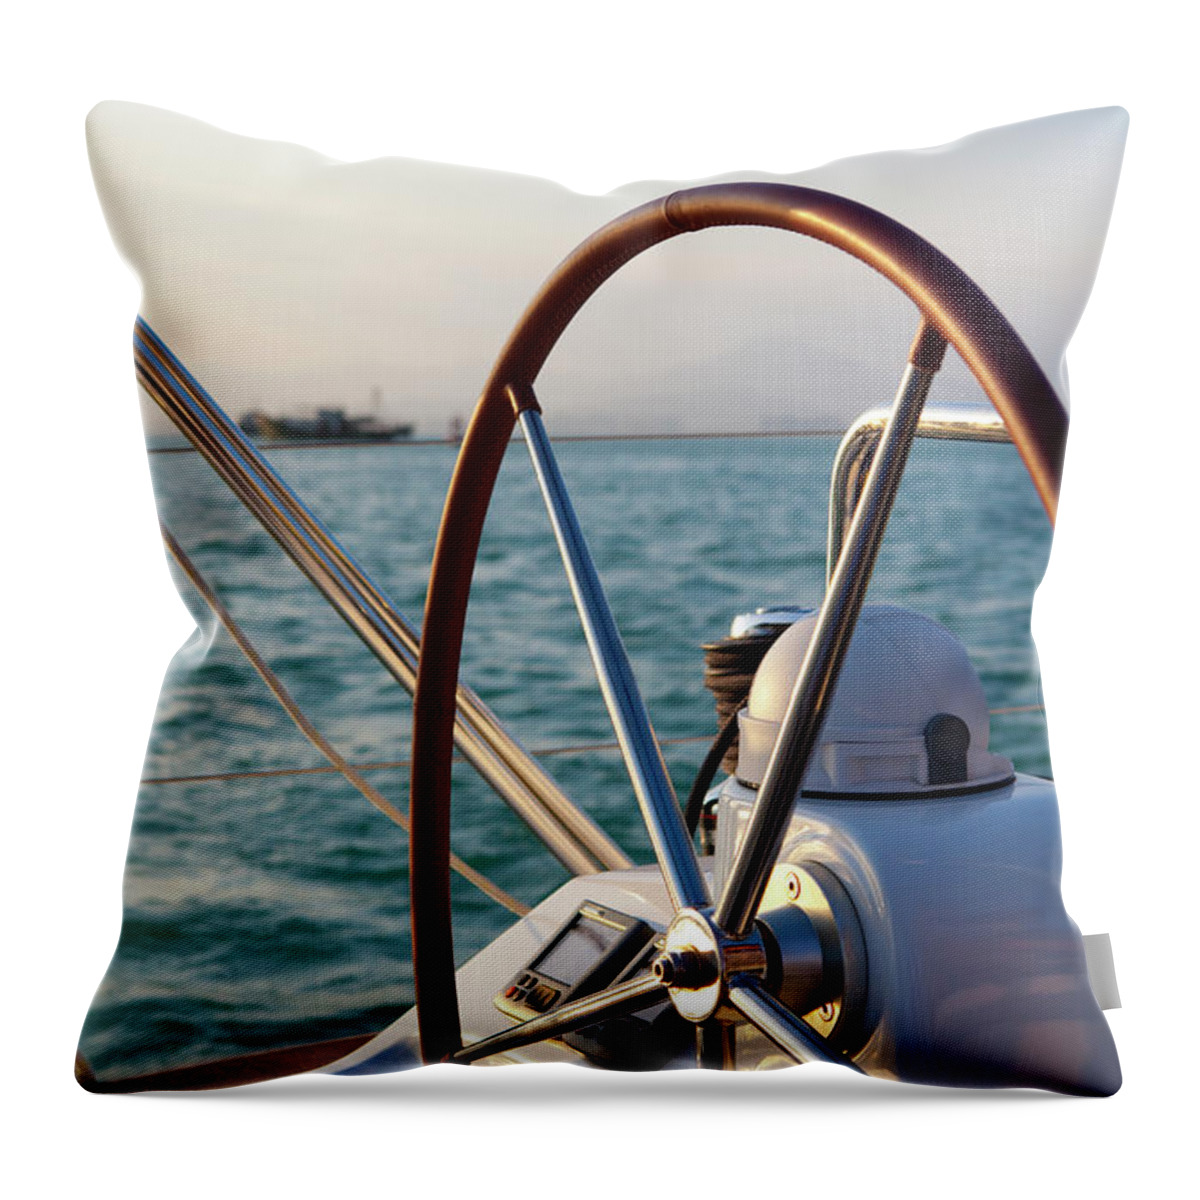 Tranquility Throw Pillow featuring the photograph Boat Steering Wheel by Lane Oatey/blue Jean Images